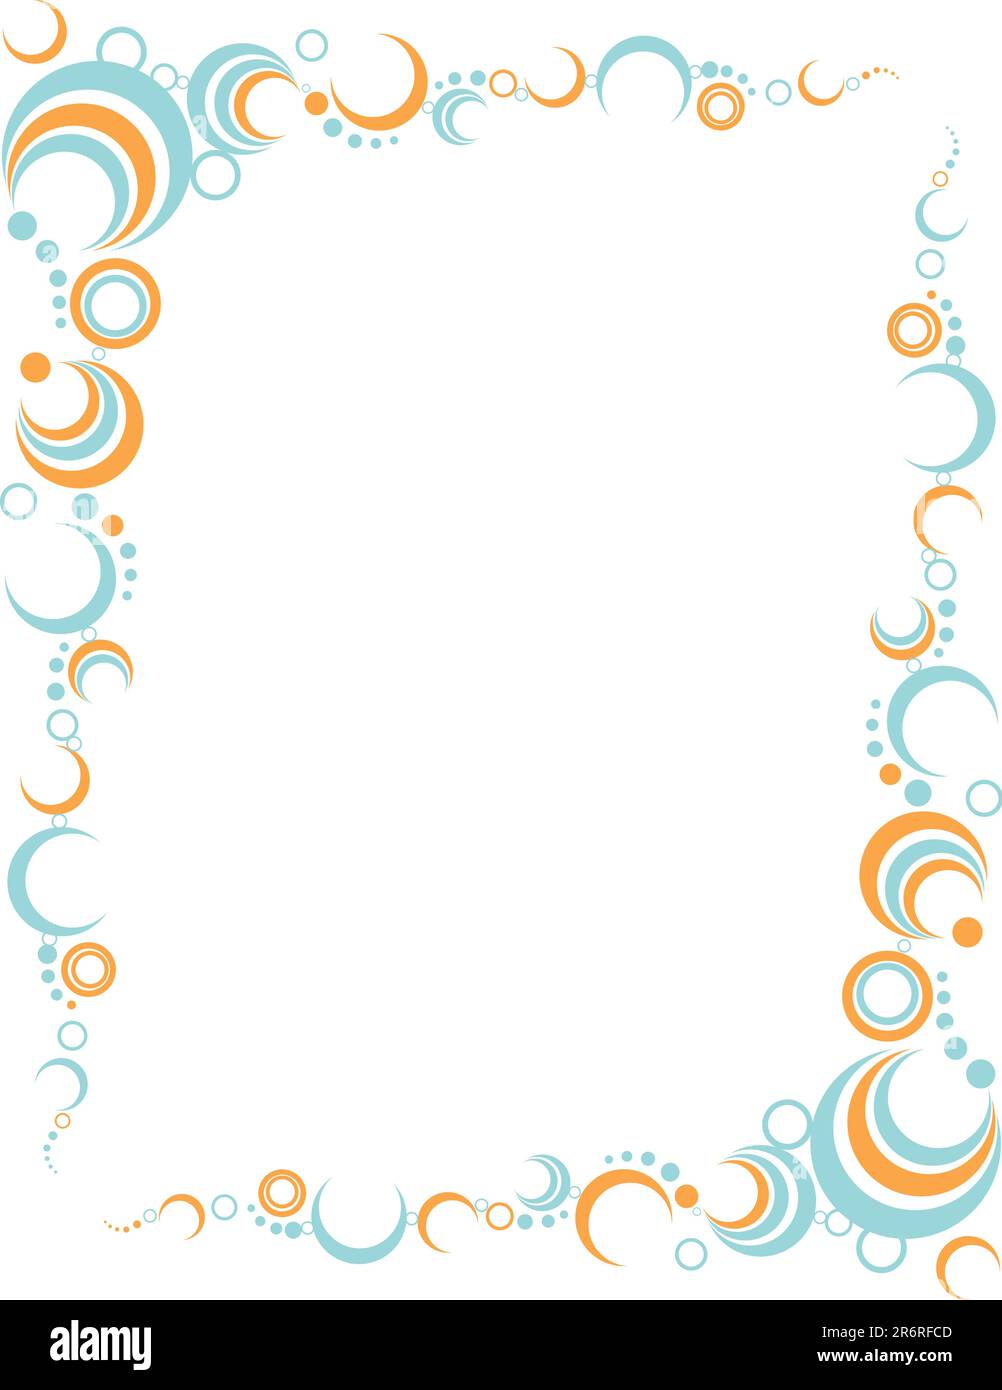 vector illustration of a decorative frame Stock Vector